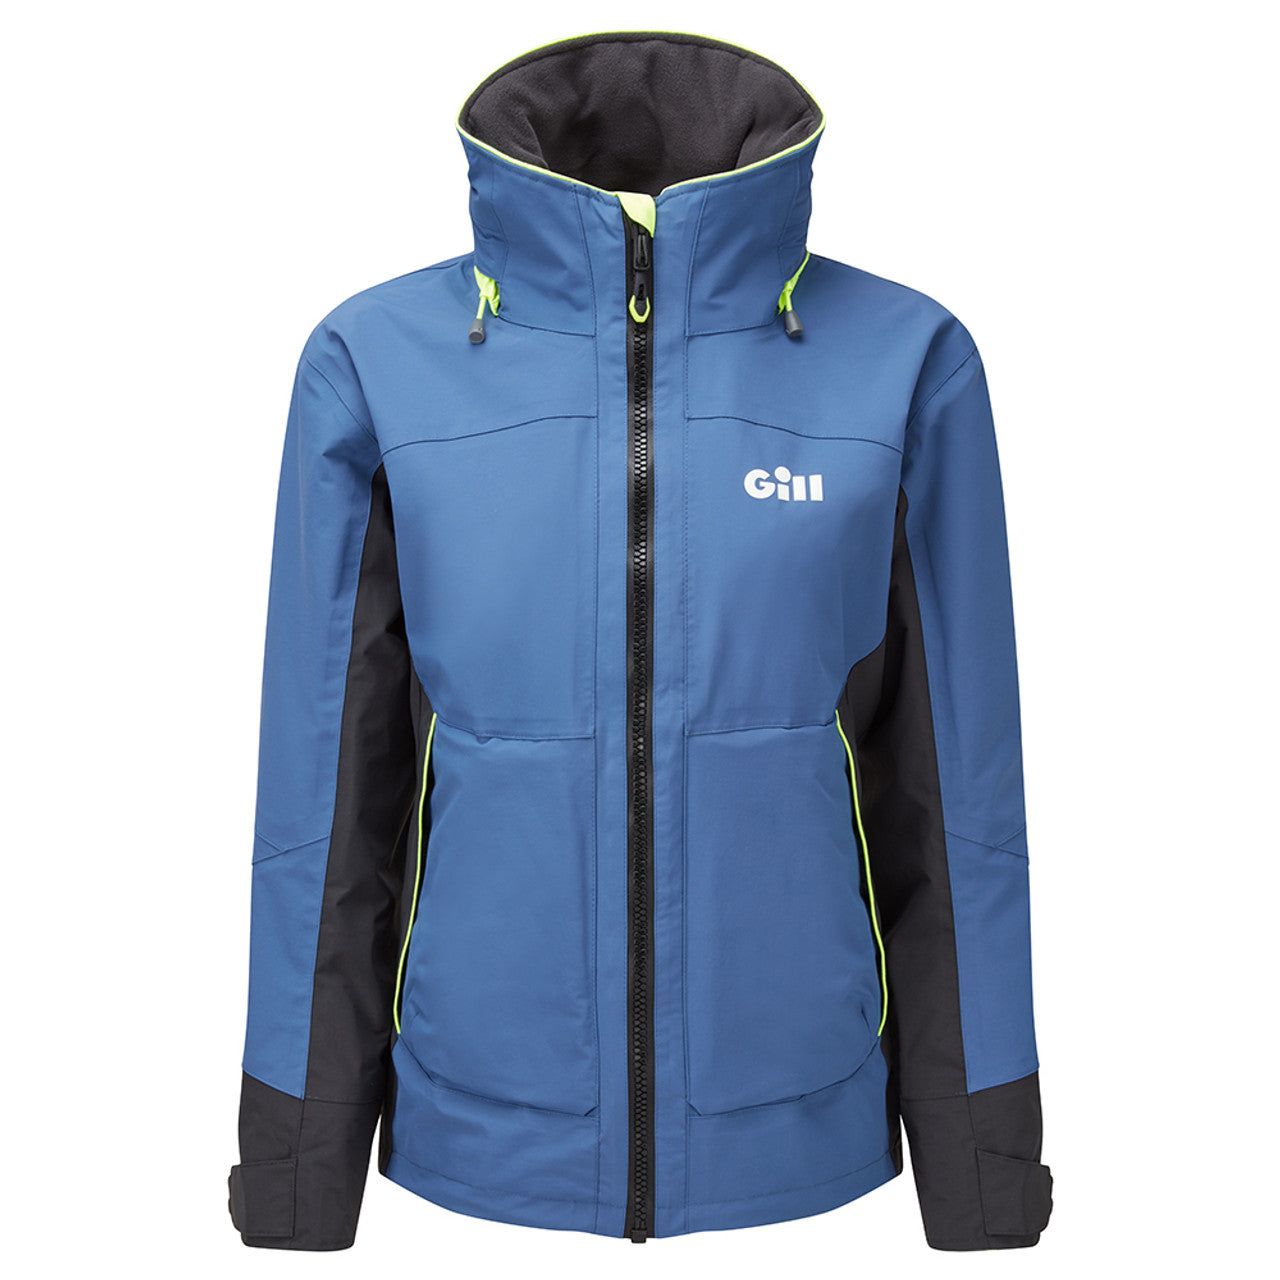 GILL Womens Pursuit Neoprene Jacket from GILL - CHAOS Fishing